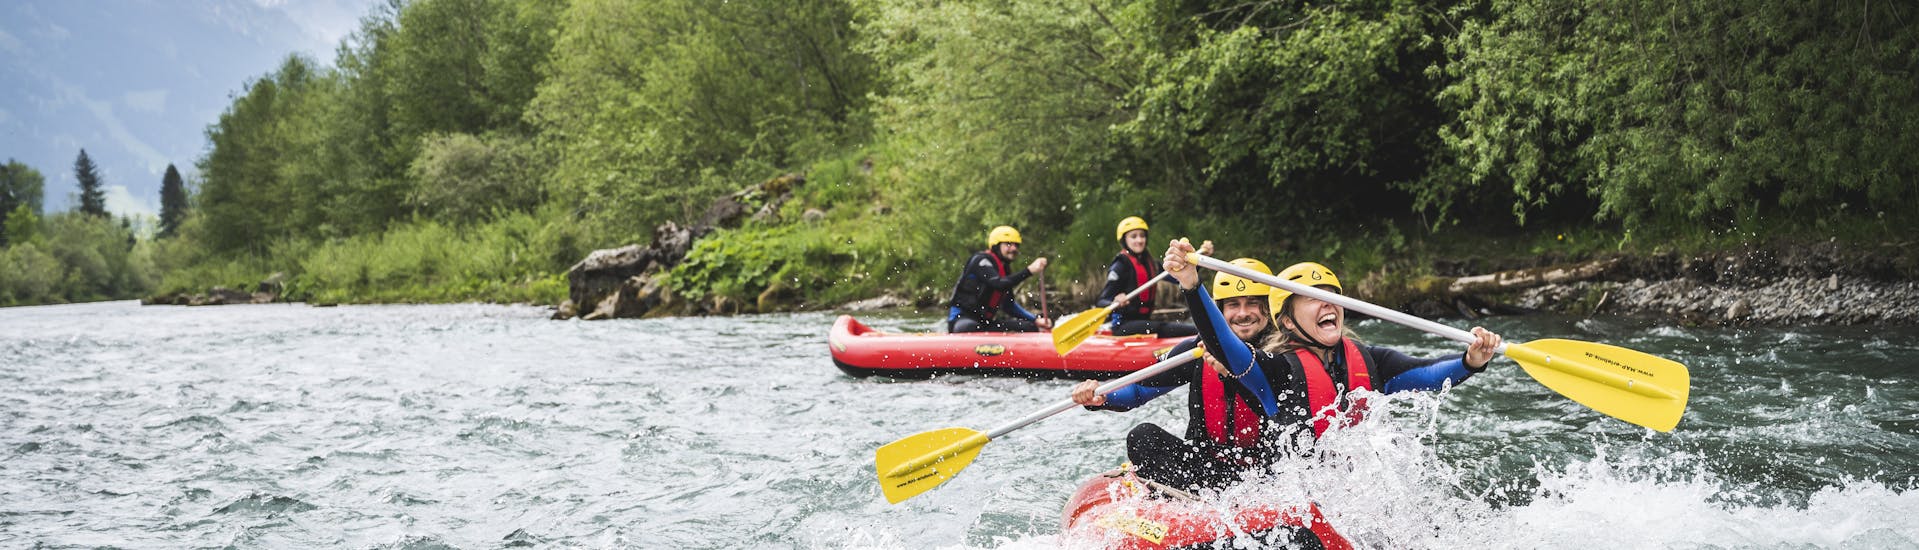 Classic Rafting - Whitewater fun on the Iller Level 2.